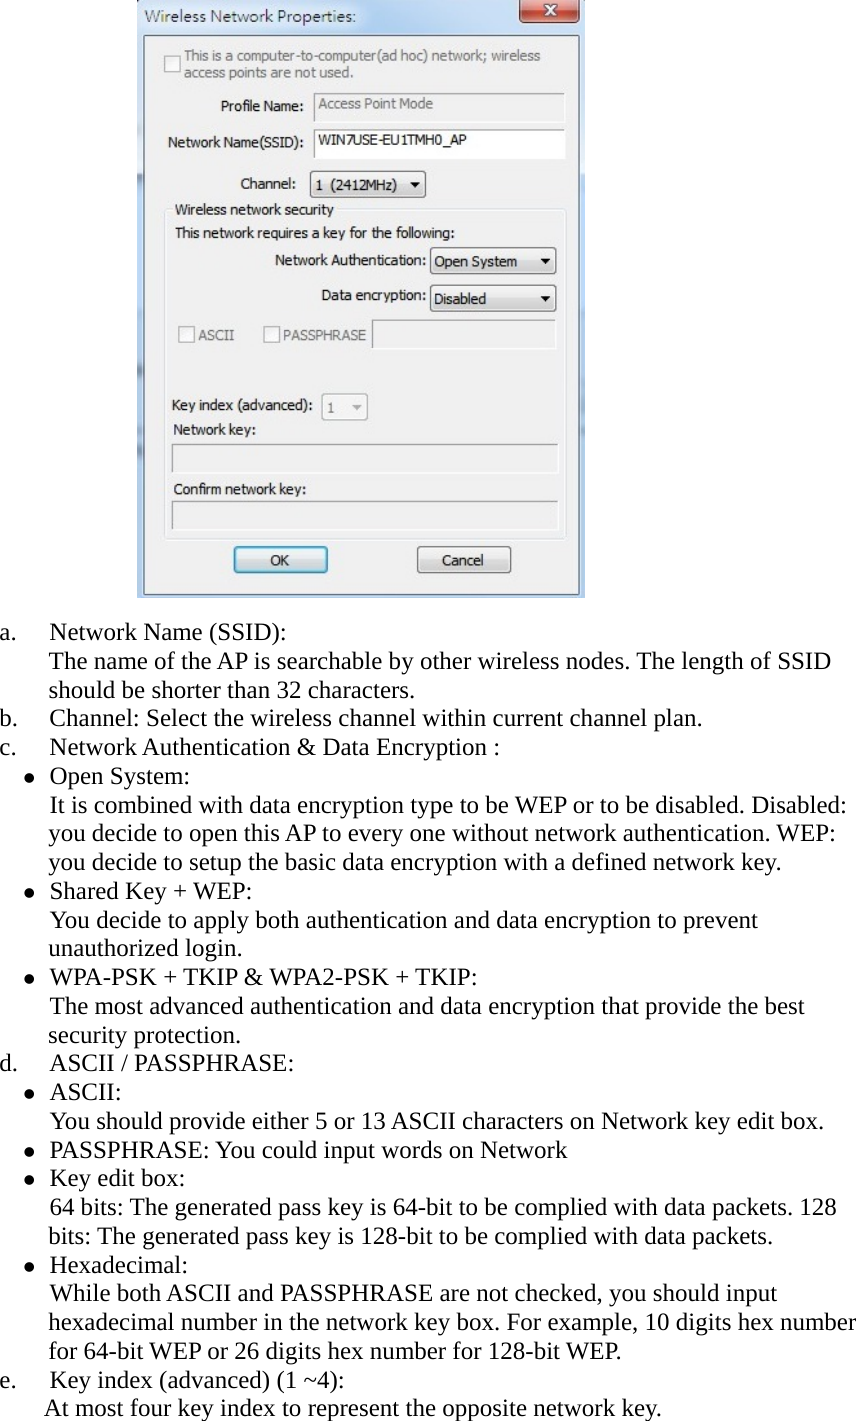              a. Network Name (SSID):   The name of the AP is searchable by other wireless nodes. The length of SSID should be shorter than 32 characters.   b. Channel: Select the wireless channel within current channel plan.   c. Network Authentication &amp; Data Encryption :    Open System:   It is combined with data encryption type to be WEP or to be disabled. Disabled: you decide to open this AP to every one without network authentication. WEP: you decide to setup the basic data encryption with a defined network key.    Shared Key + WEP:   You decide to apply both authentication and data encryption to prevent unauthorized login.    WPA-PSK + TKIP &amp; WPA2-PSK + TKIP:   The most advanced authentication and data encryption that provide the best security protection.   d. ASCII / PASSPHRASE:    ASCII:  You should provide either 5 or 13 ASCII characters on Network key edit box.    PASSPHRASE: You could input words on Network    Key edit box:   64 bits: The generated pass key is 64-bit to be complied with data packets. 128 bits: The generated pass key is 128-bit to be complied with data packets.    Hexadecimal:  While both ASCII and PASSPHRASE are not checked, you should input hexadecimal number in the network key box. For example, 10 digits hex number for 64-bit WEP or 26 digits hex number for 128-bit WEP.   e. Key index (advanced) (1 ~4):   At most four key index to represent the opposite network key. 